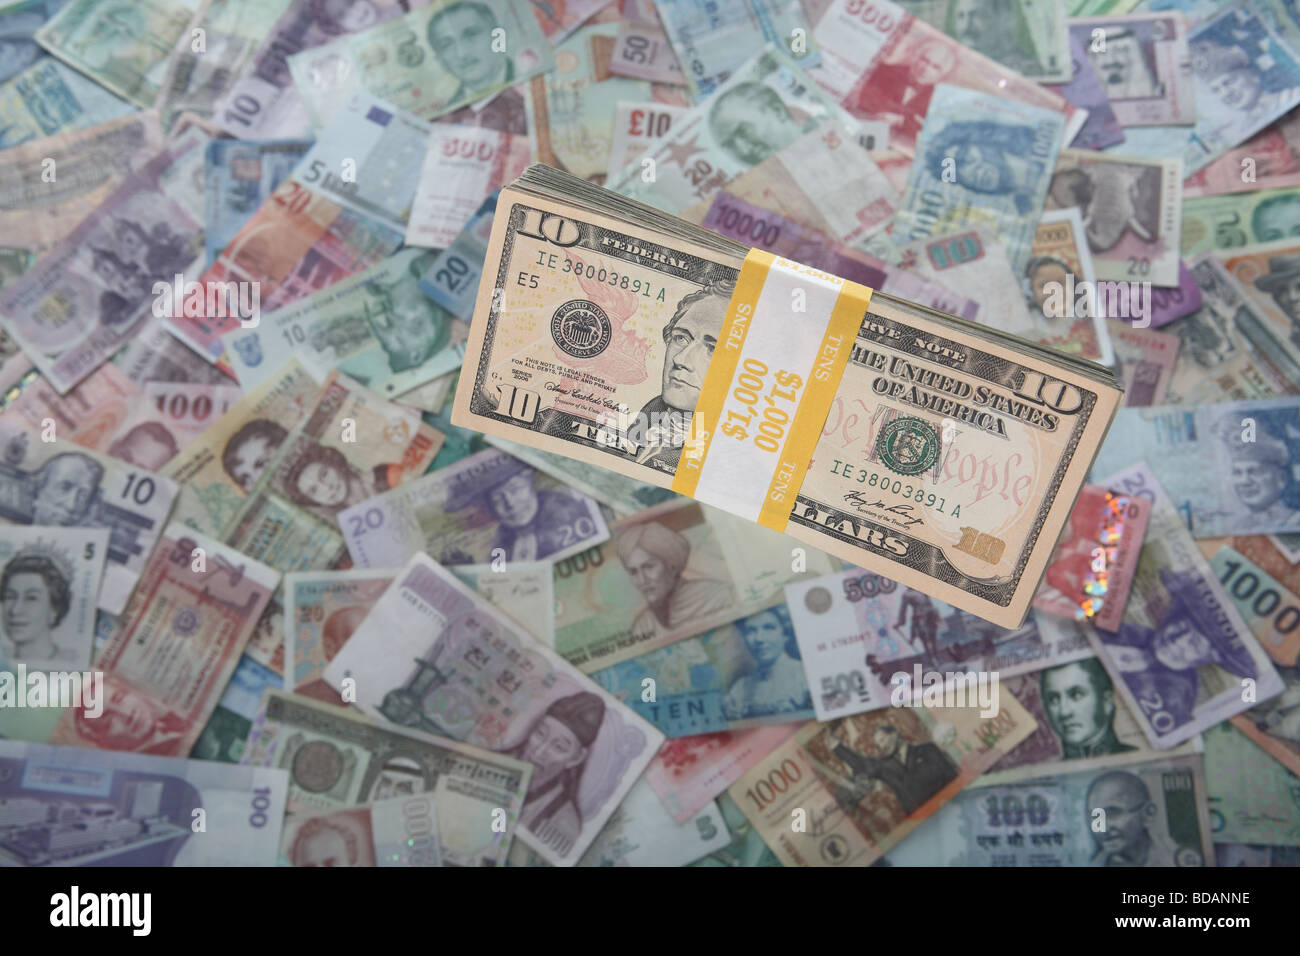 A bundled stack of ten dollar bills on a soft background of international currencies Stock Photo